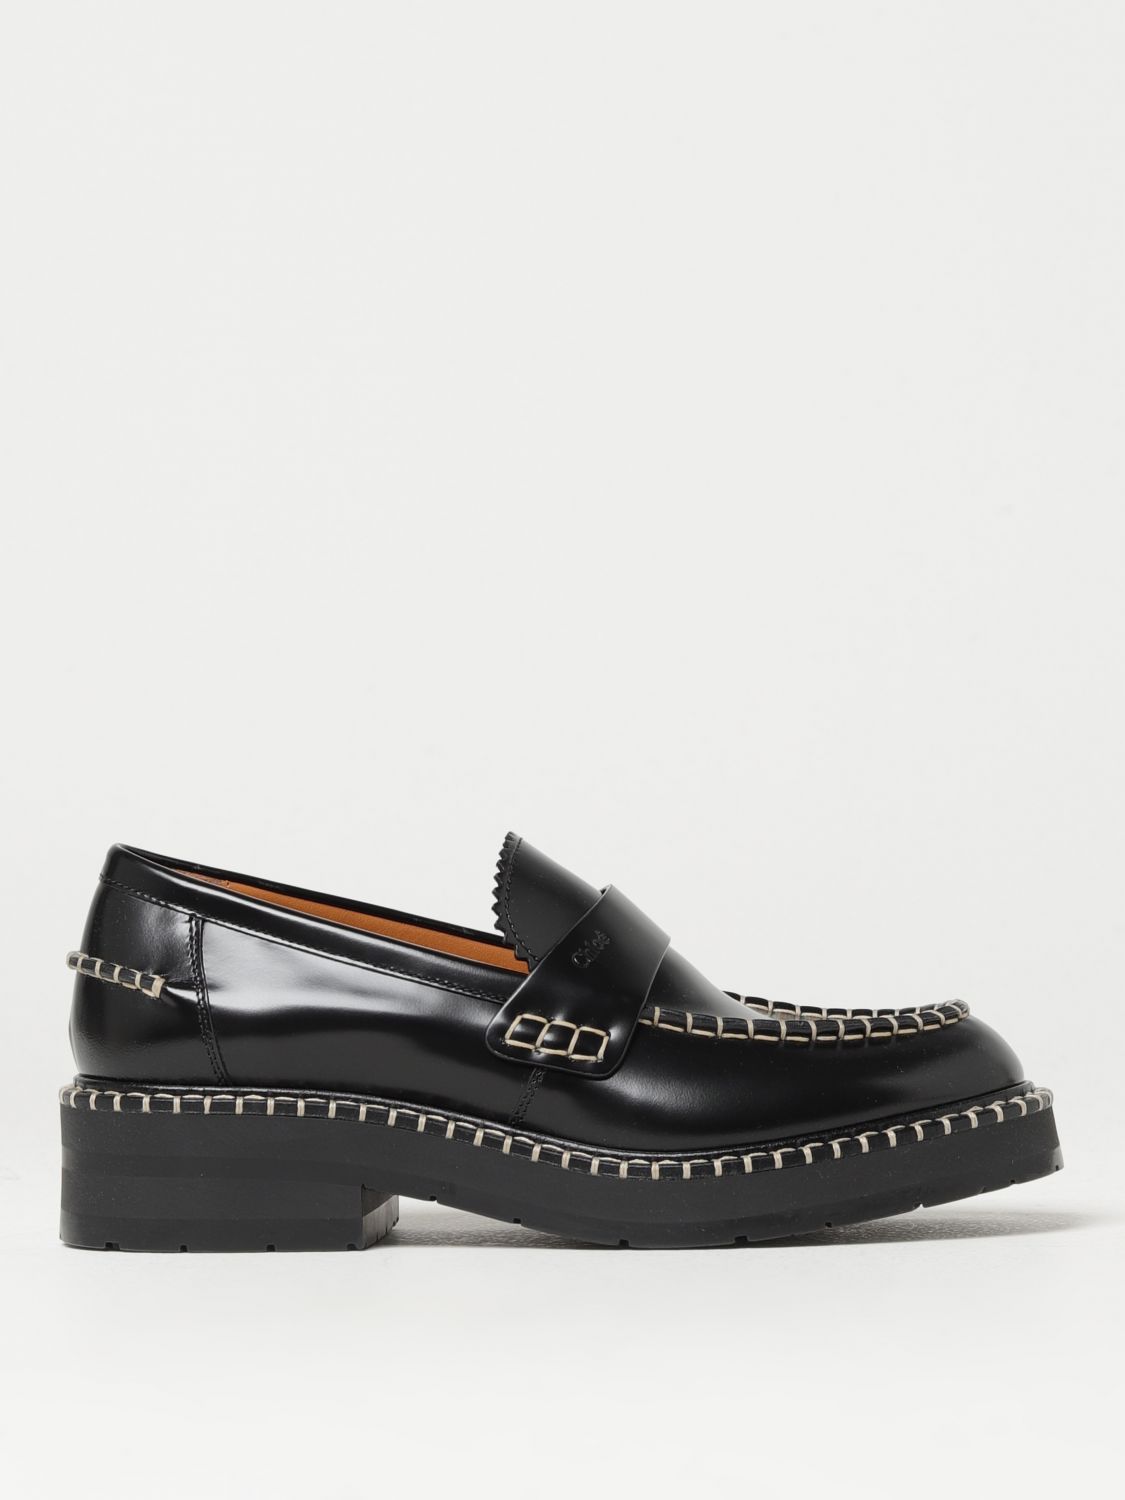 CHLOÉ MOCCASINS IN BRUSHED LEATHER WITH LOGO,E73741002